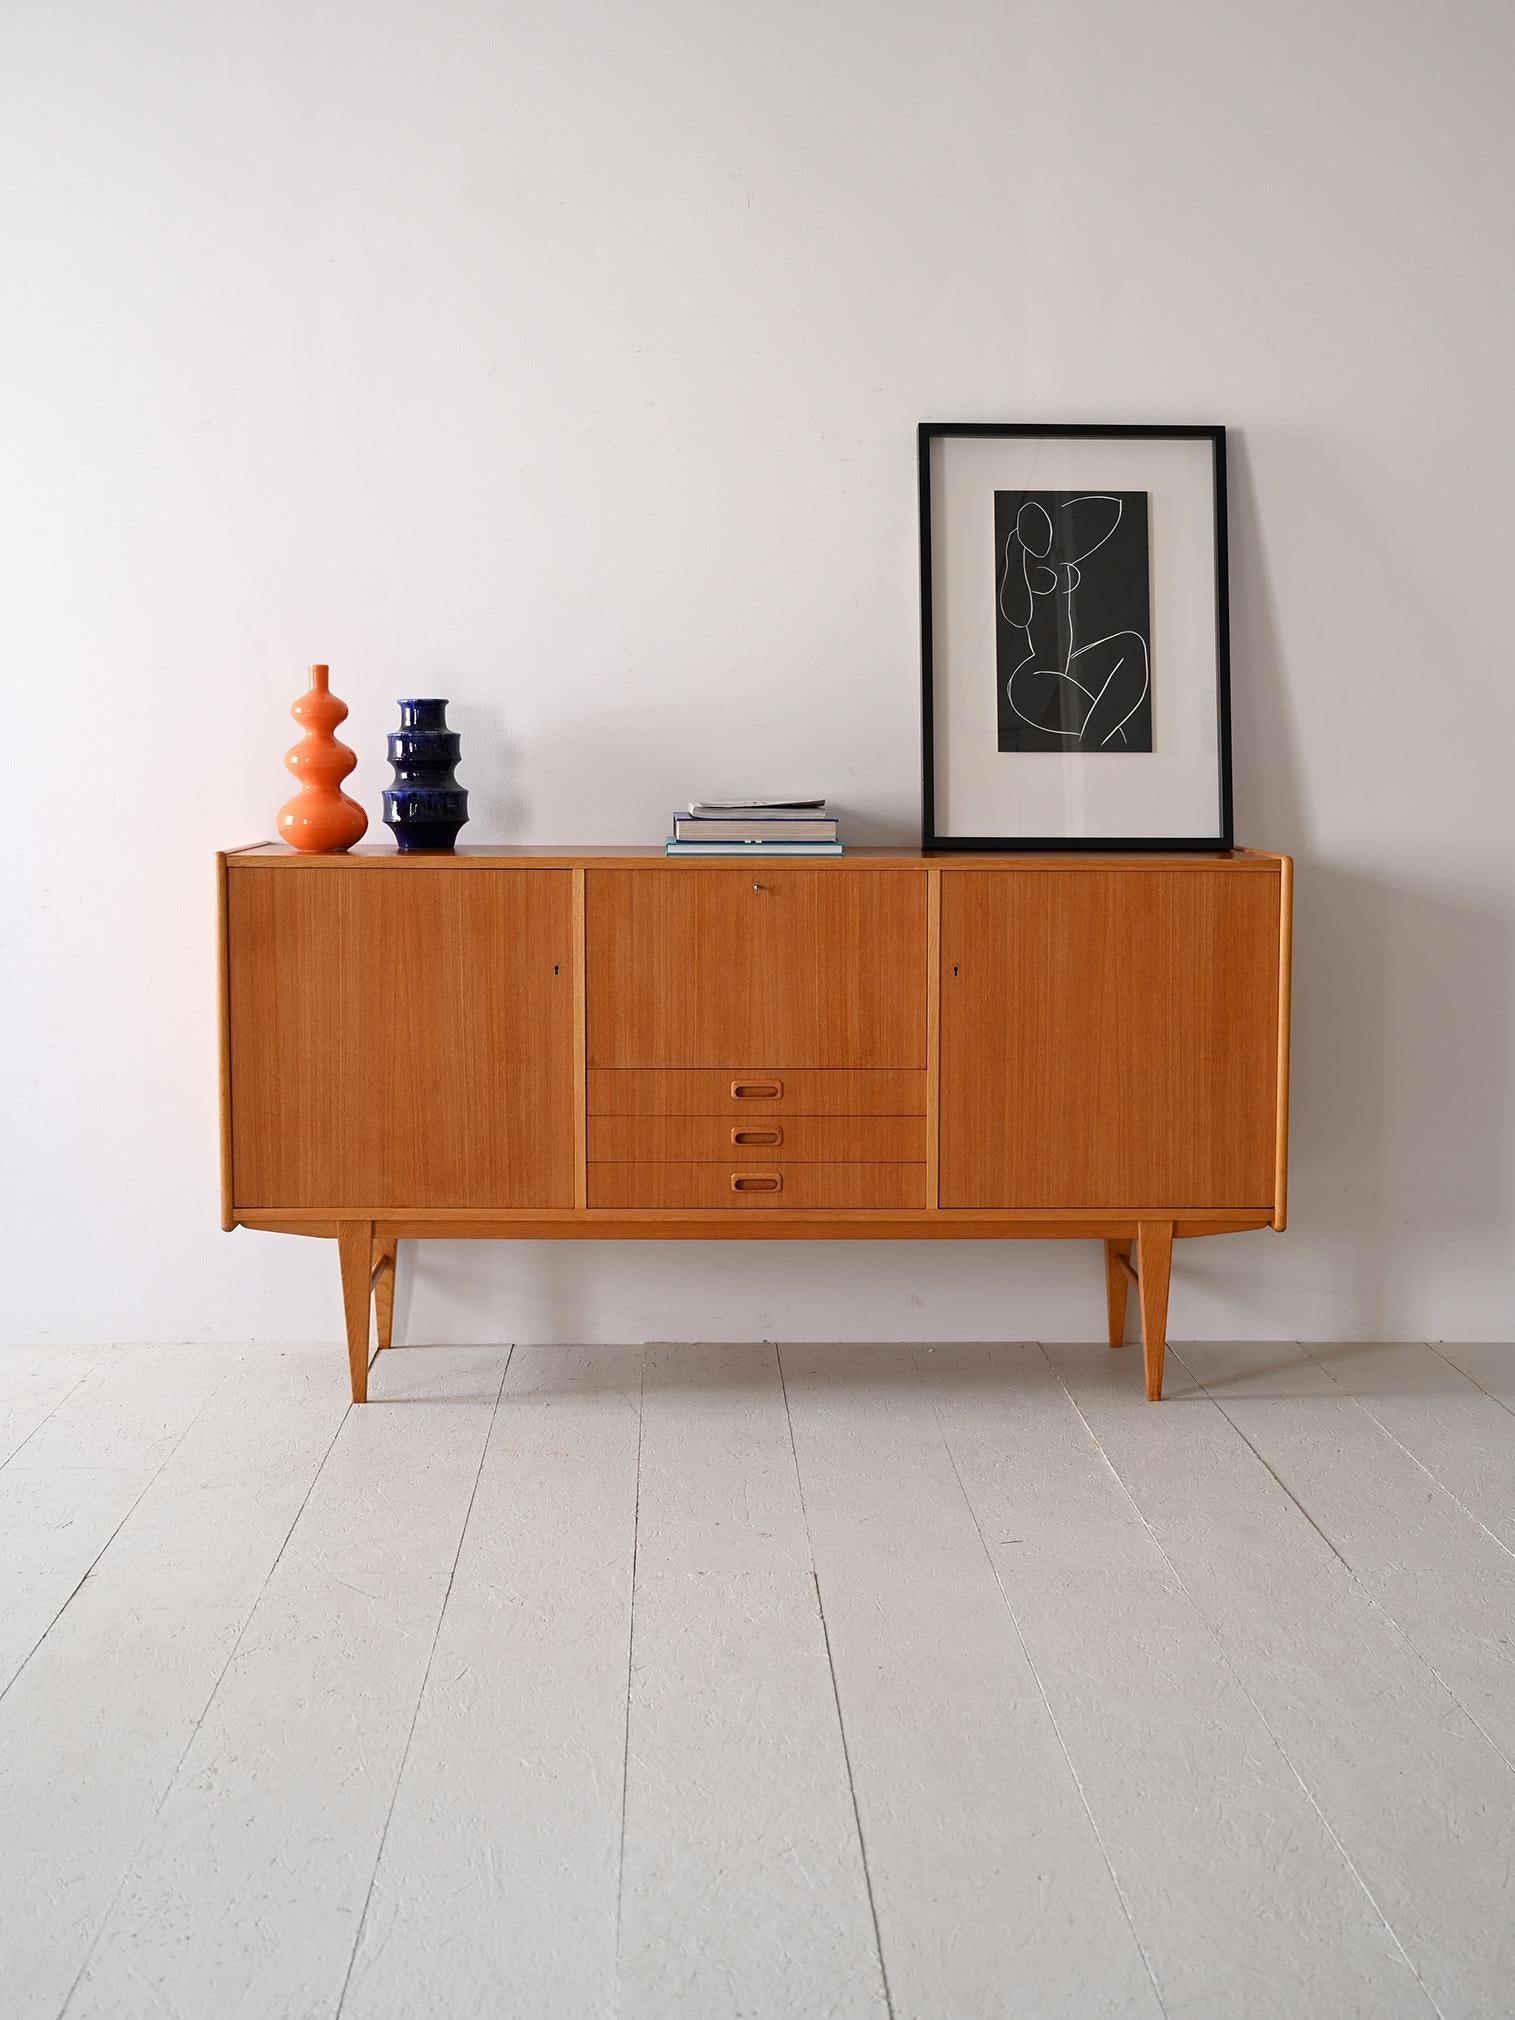 This 1960s Scandinavian oak sideboard is a testament to the functional design of the era. 
Equipped with two compartments with hinged doors and three central drawers, it offers a versatile storage solution. The flap door compartment adds a unique